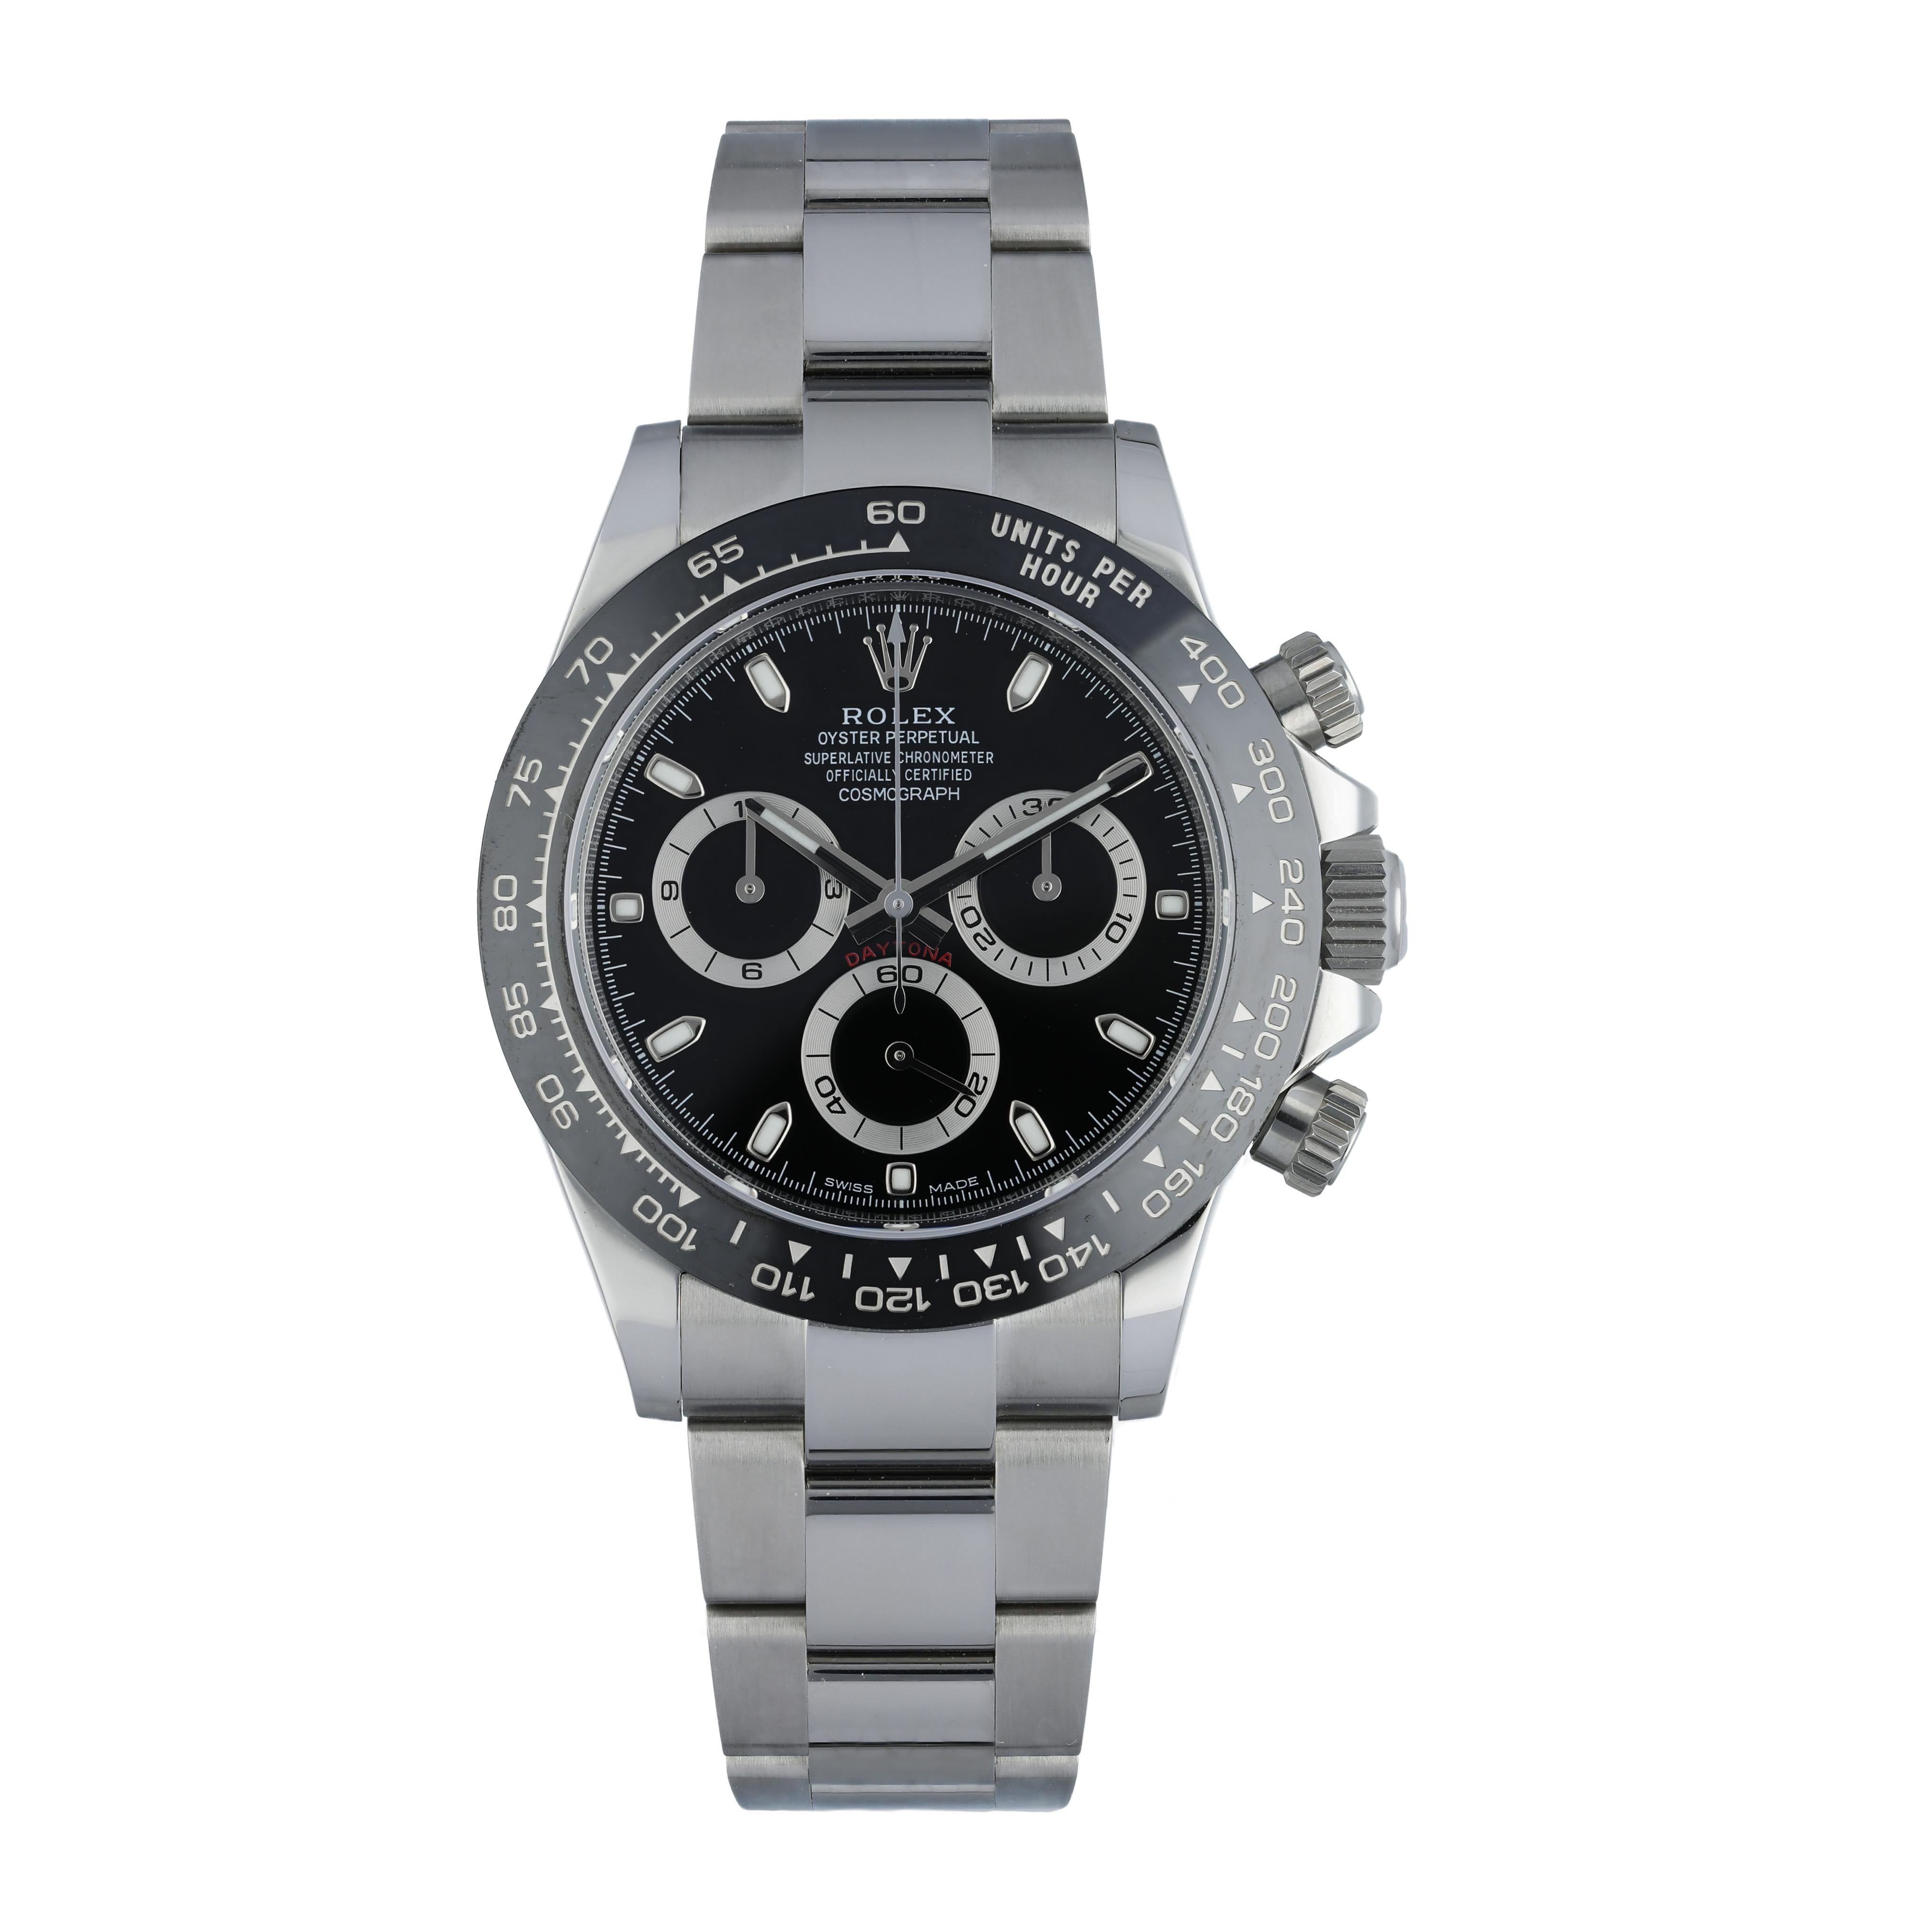 Rolex Cosmograph Daytona 116500LN Men's Watch Box Papers For Sale 1